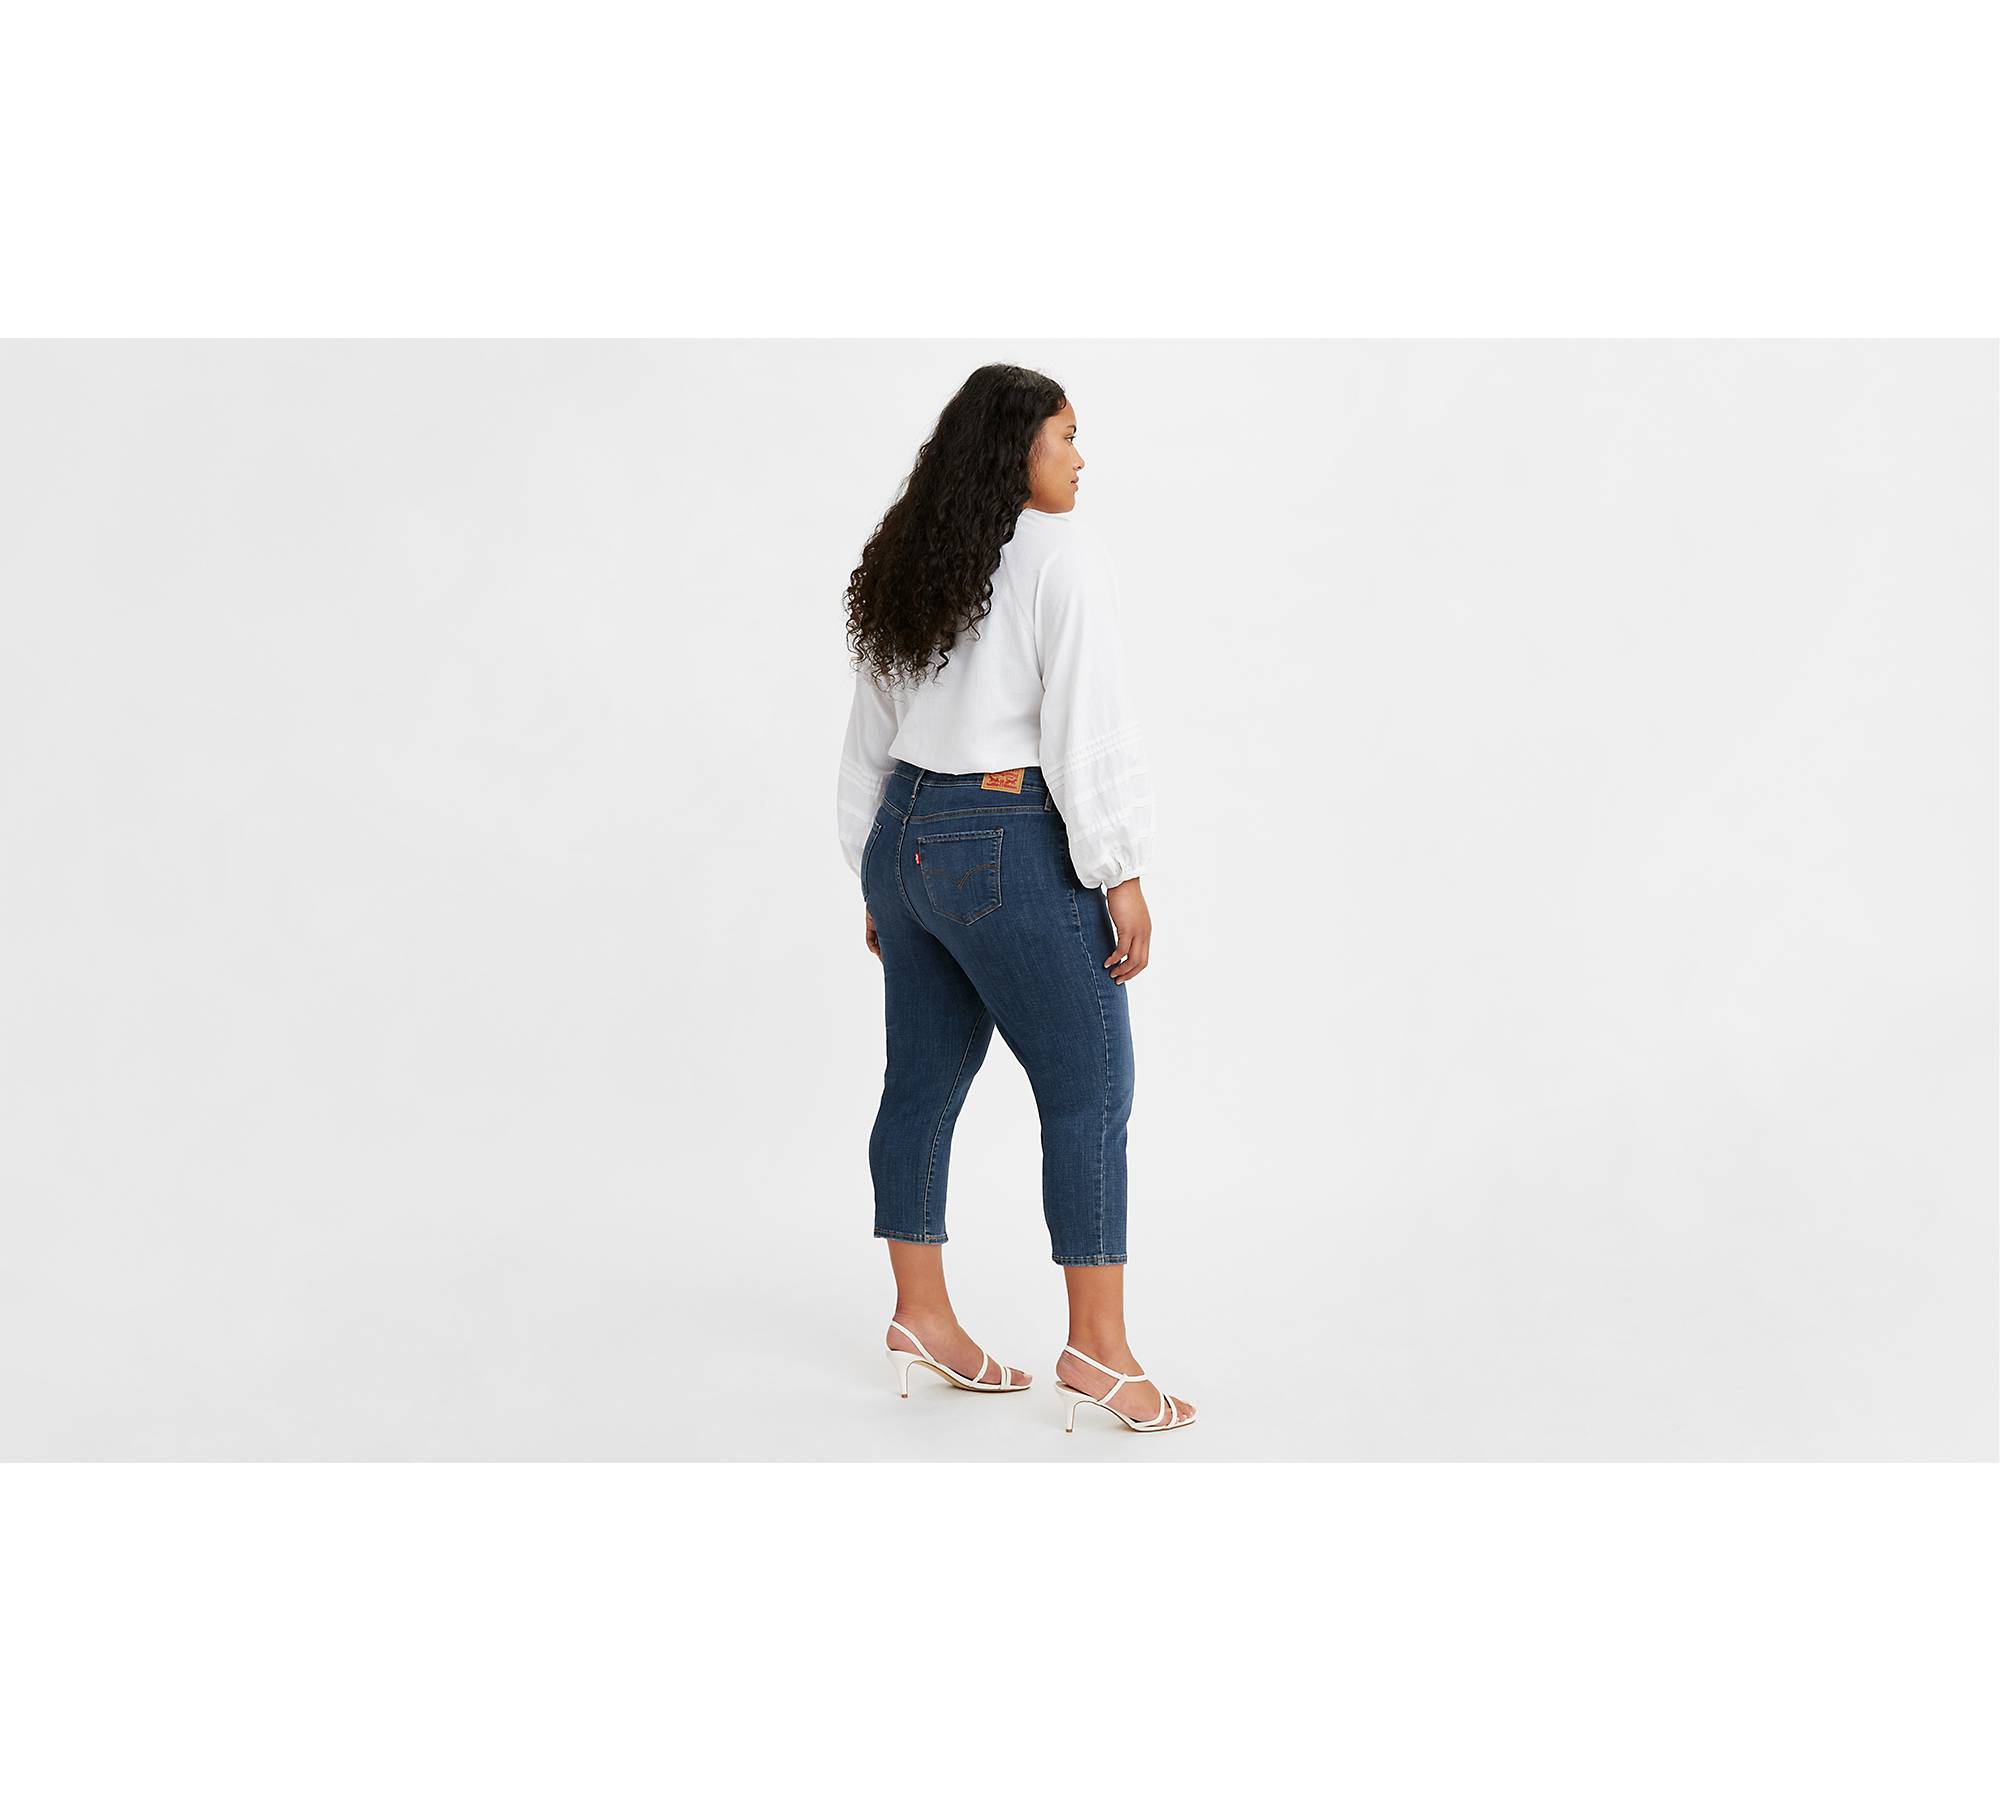 Style Plus Size Fashion Summer Women High Waist Skinny Jeans Knee Length  Hole Ripped Denim Capri Slim Streetwear Stretch Casual From Here_well,  $10.33